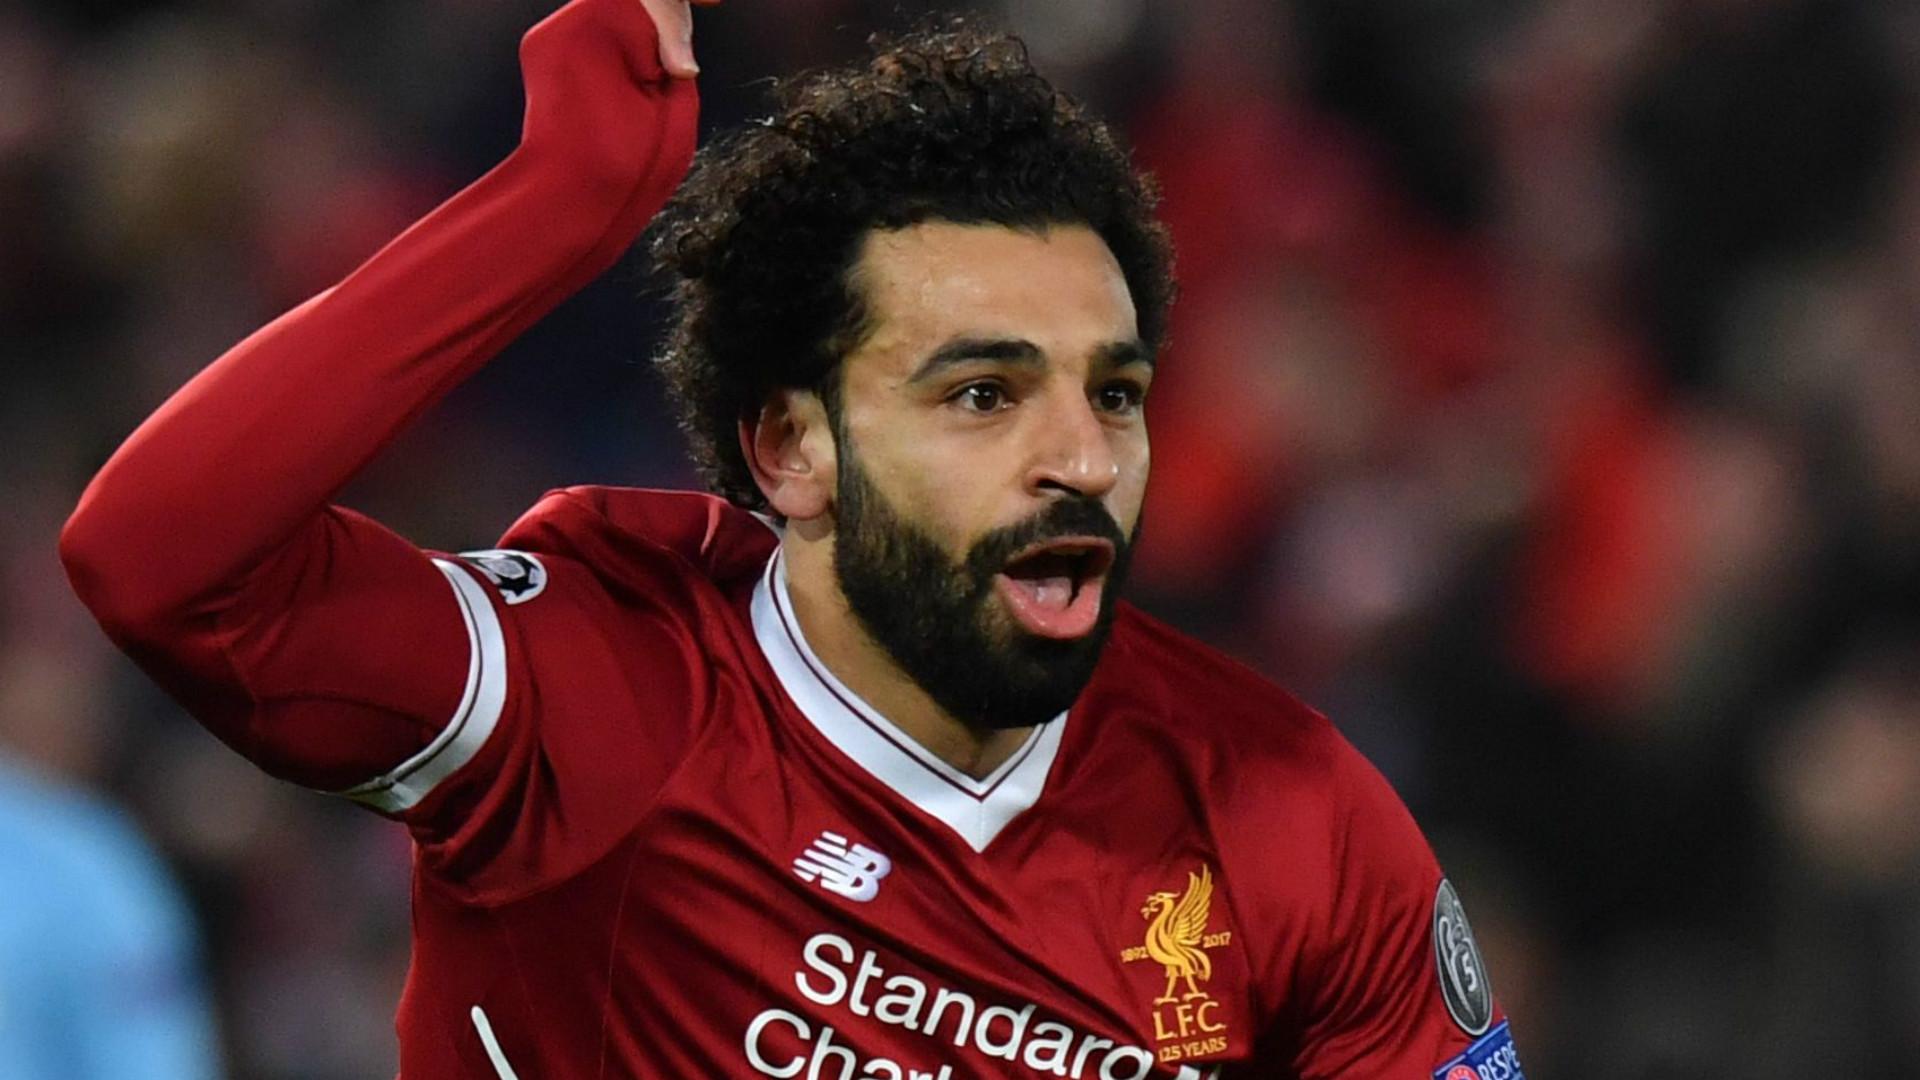 Mohamed Salah: I'm proud to be compared to Messi and Ronaldo